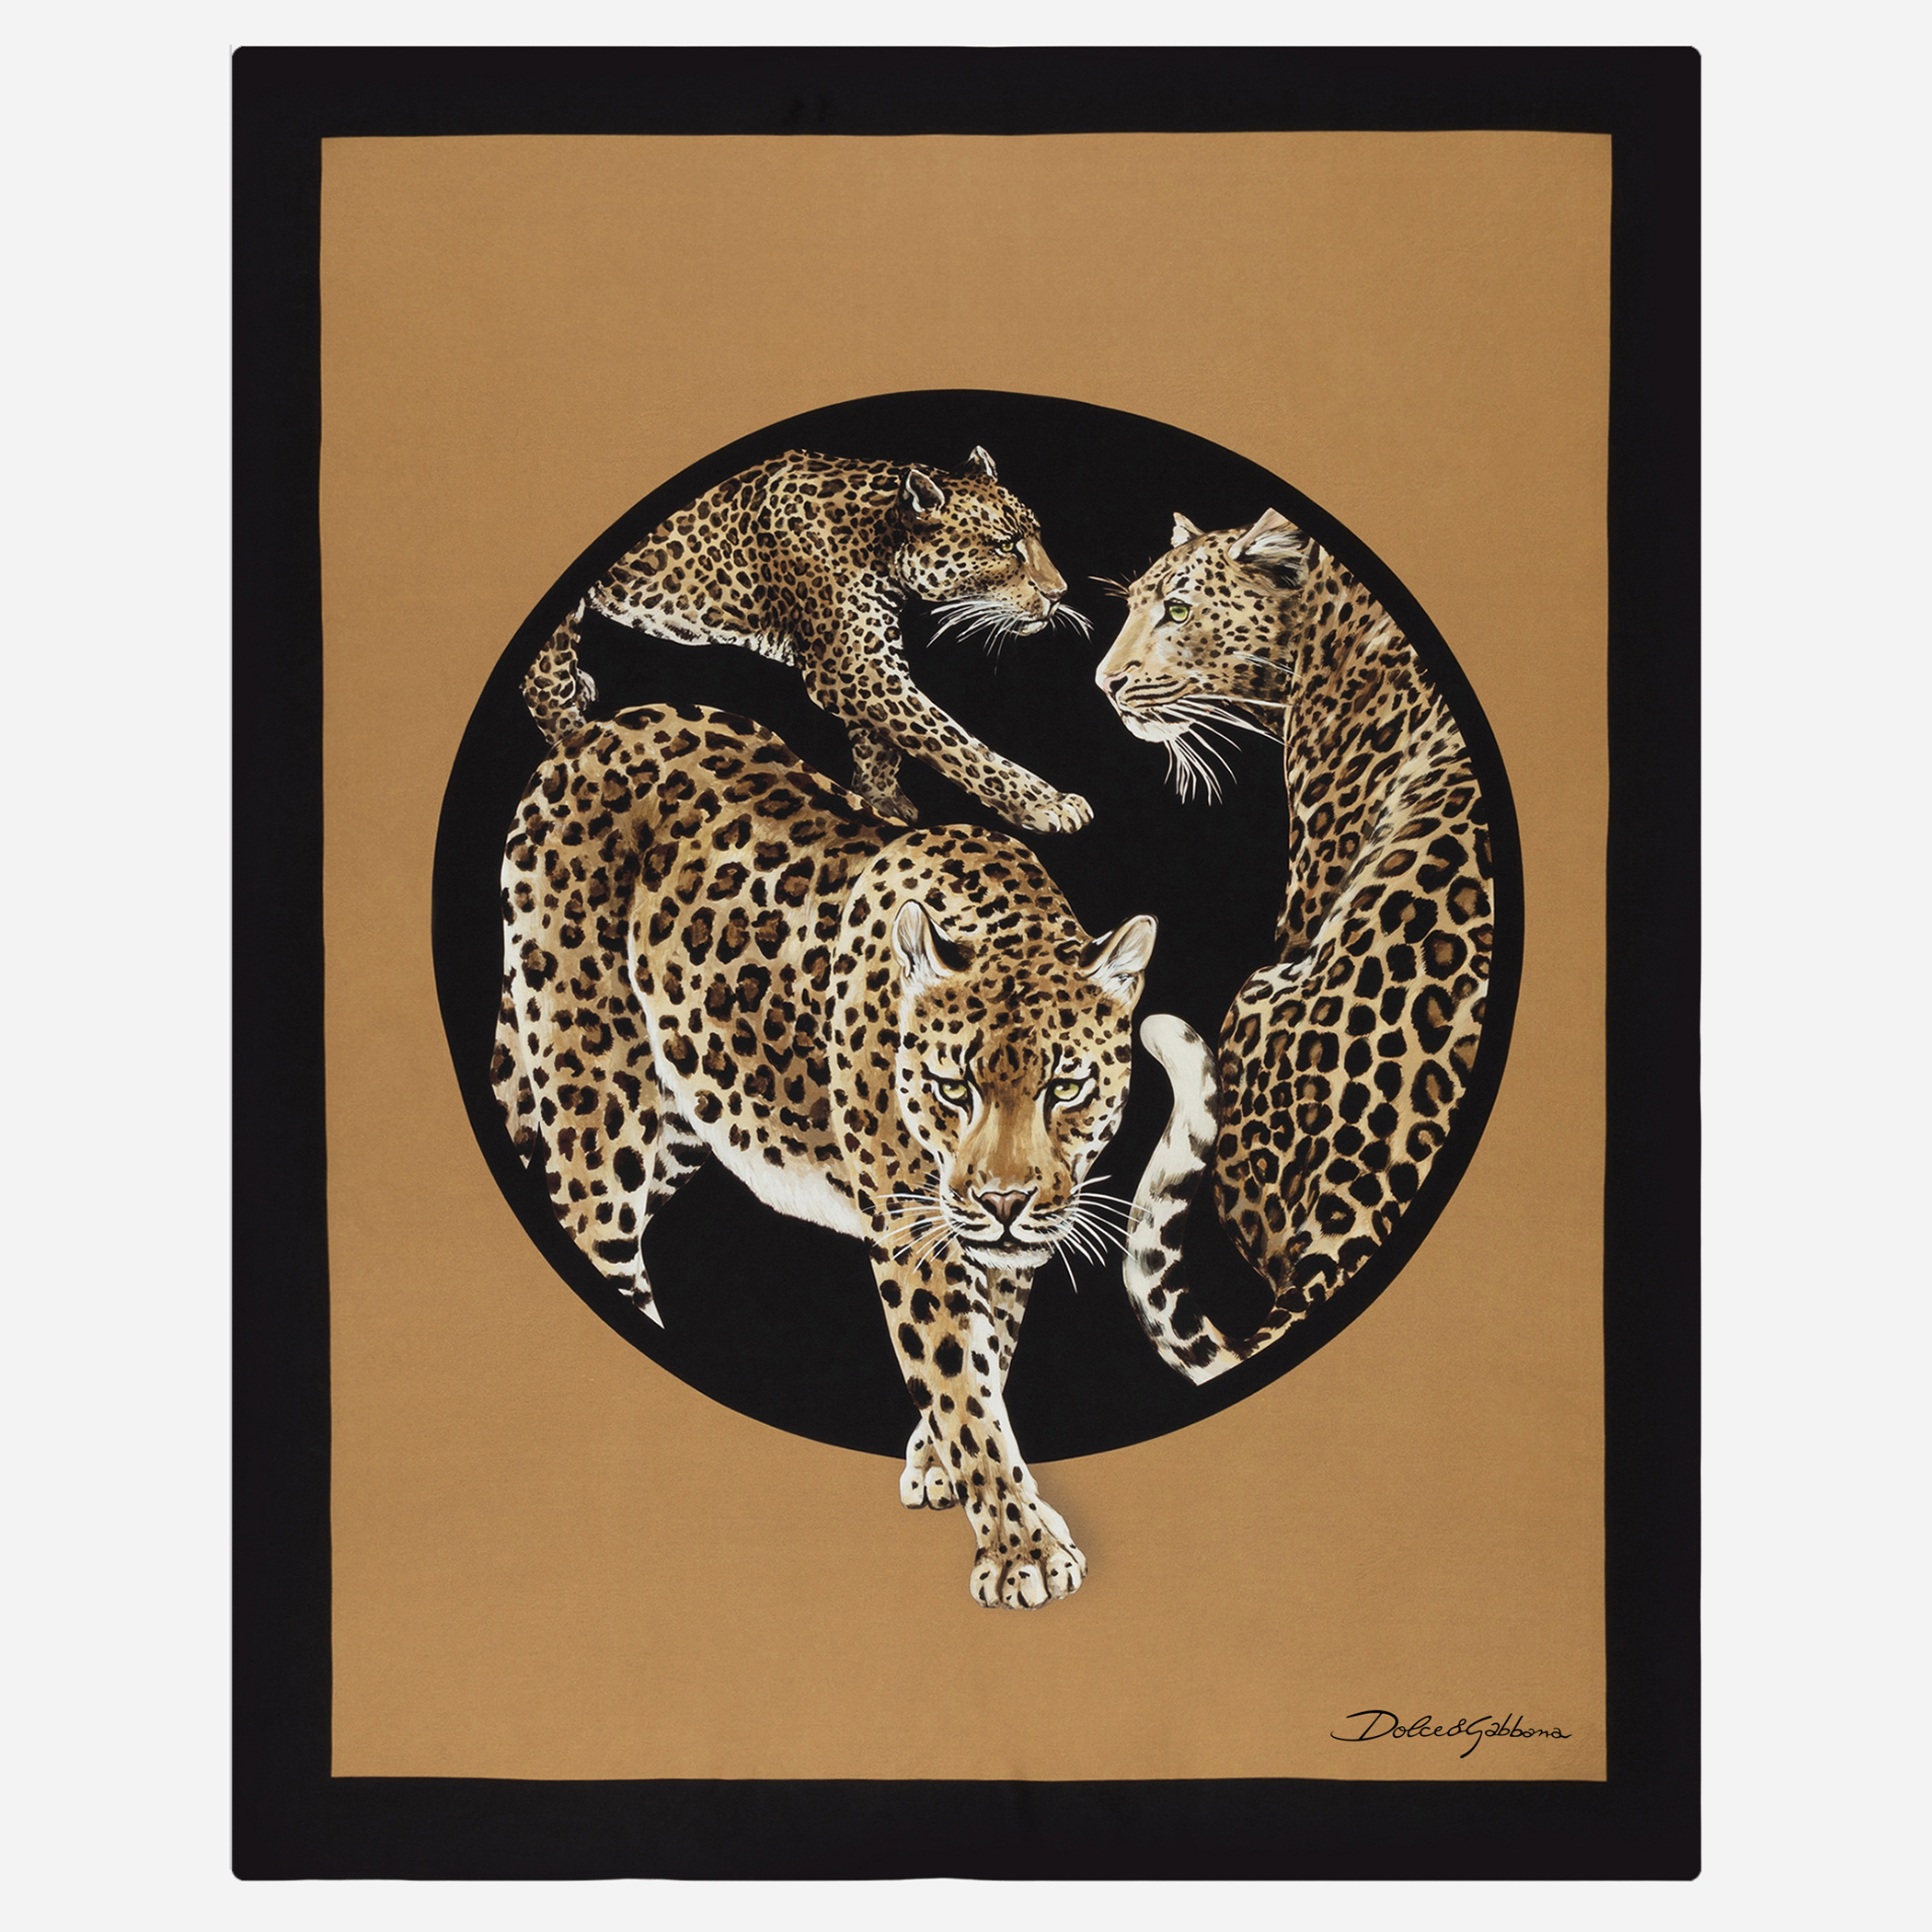 The story of LEOPARD in Dolce&Gabbana